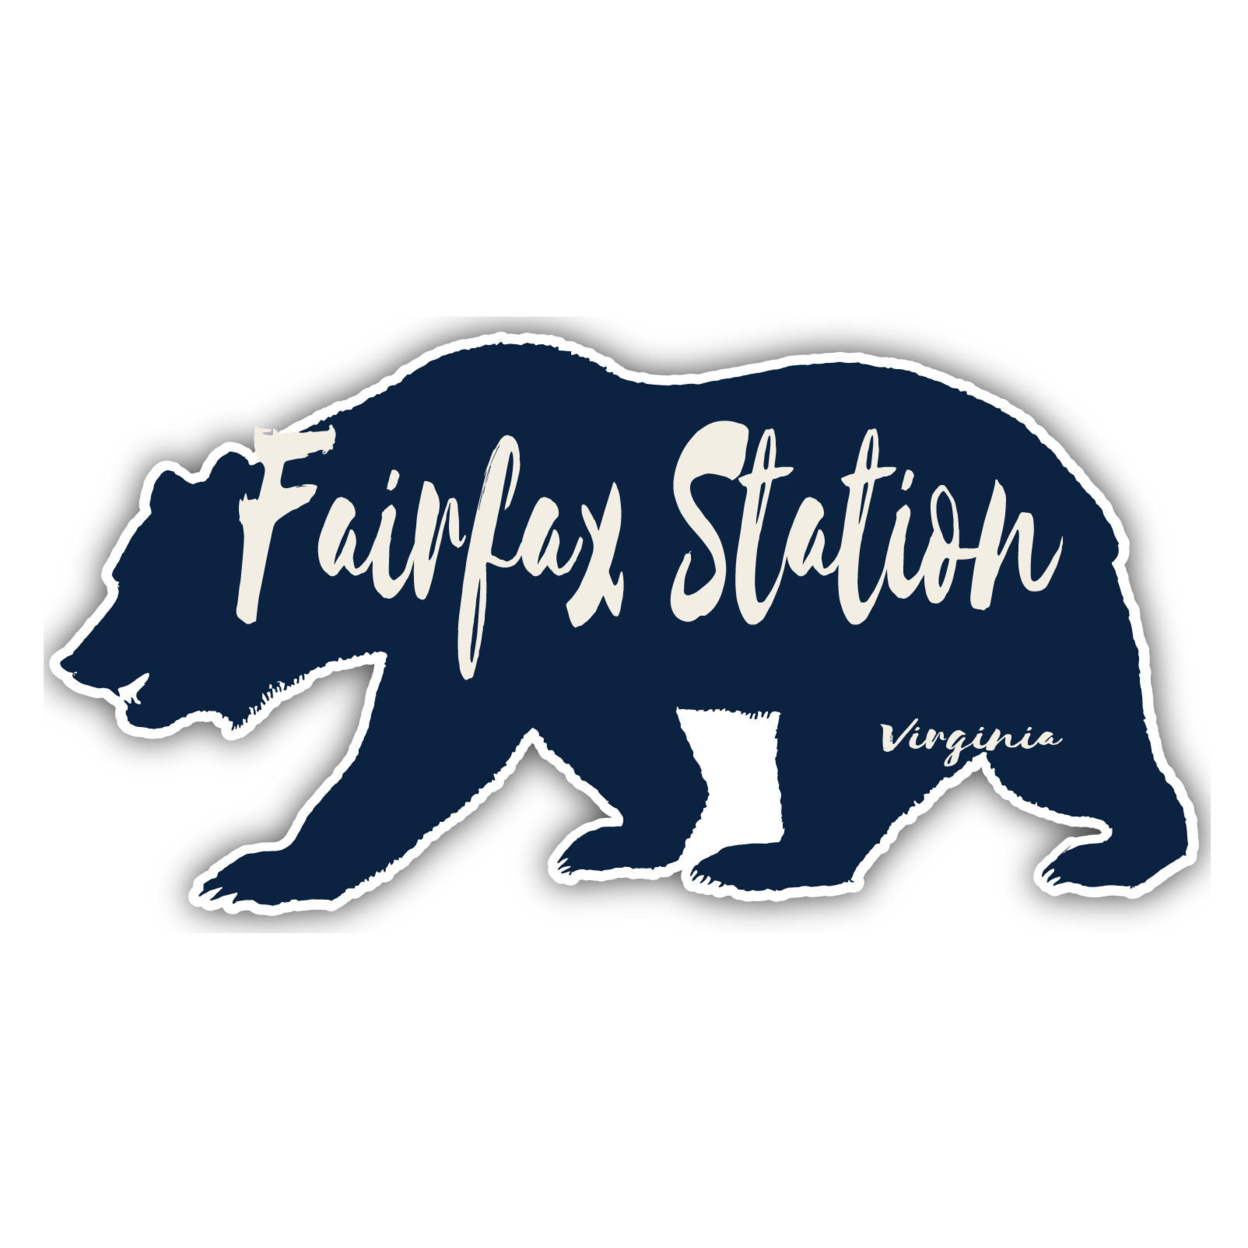 Fairfax Station Virginia Souvenir Decorative Stickers (Choose Theme And Size) - Single Unit, 8-Inch, Great Outdoors